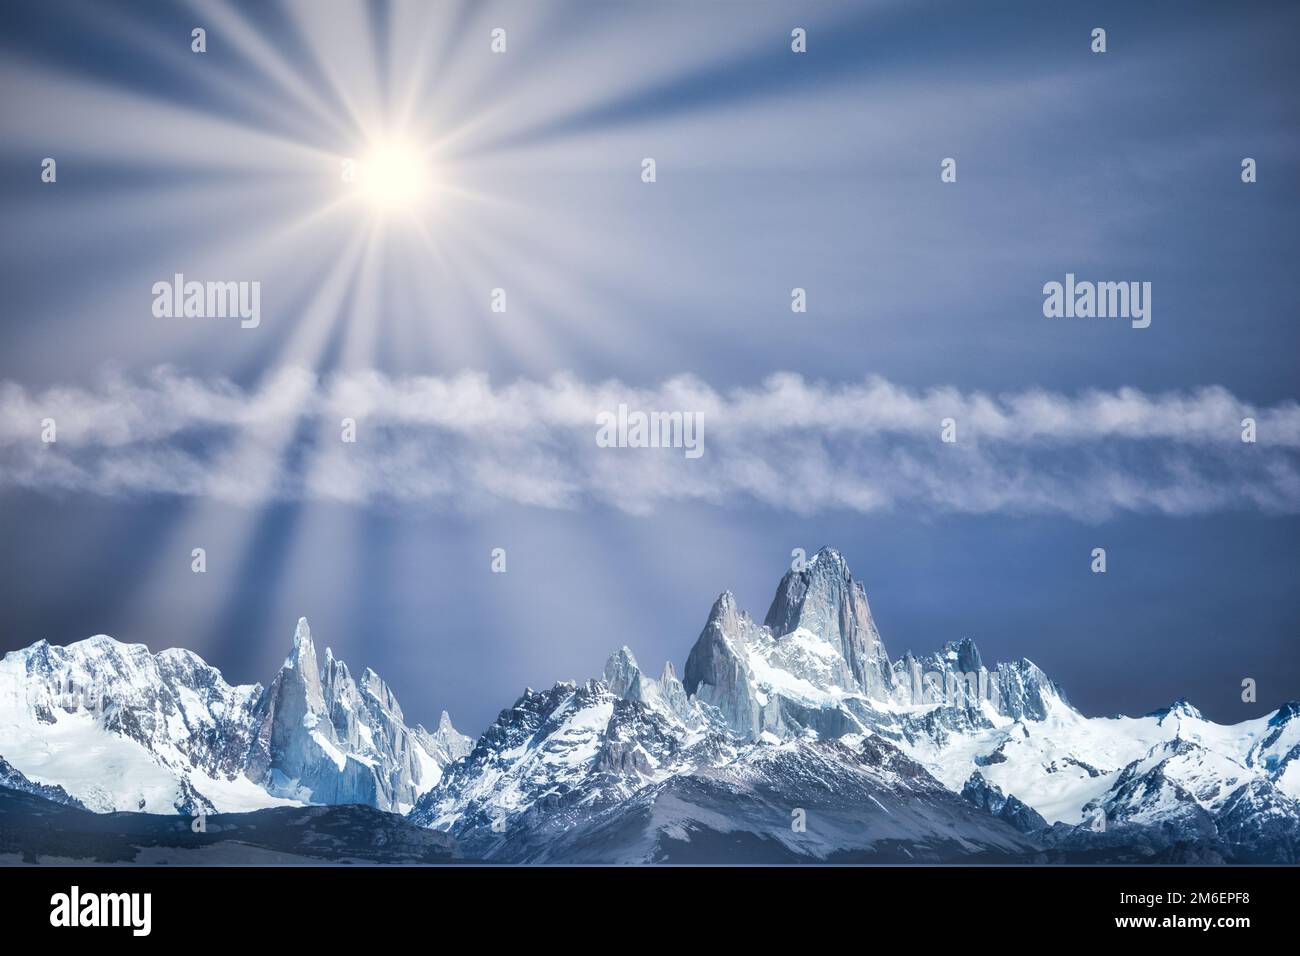 Mystical mountains with bright sun under a blue lighted sky Stock Photo